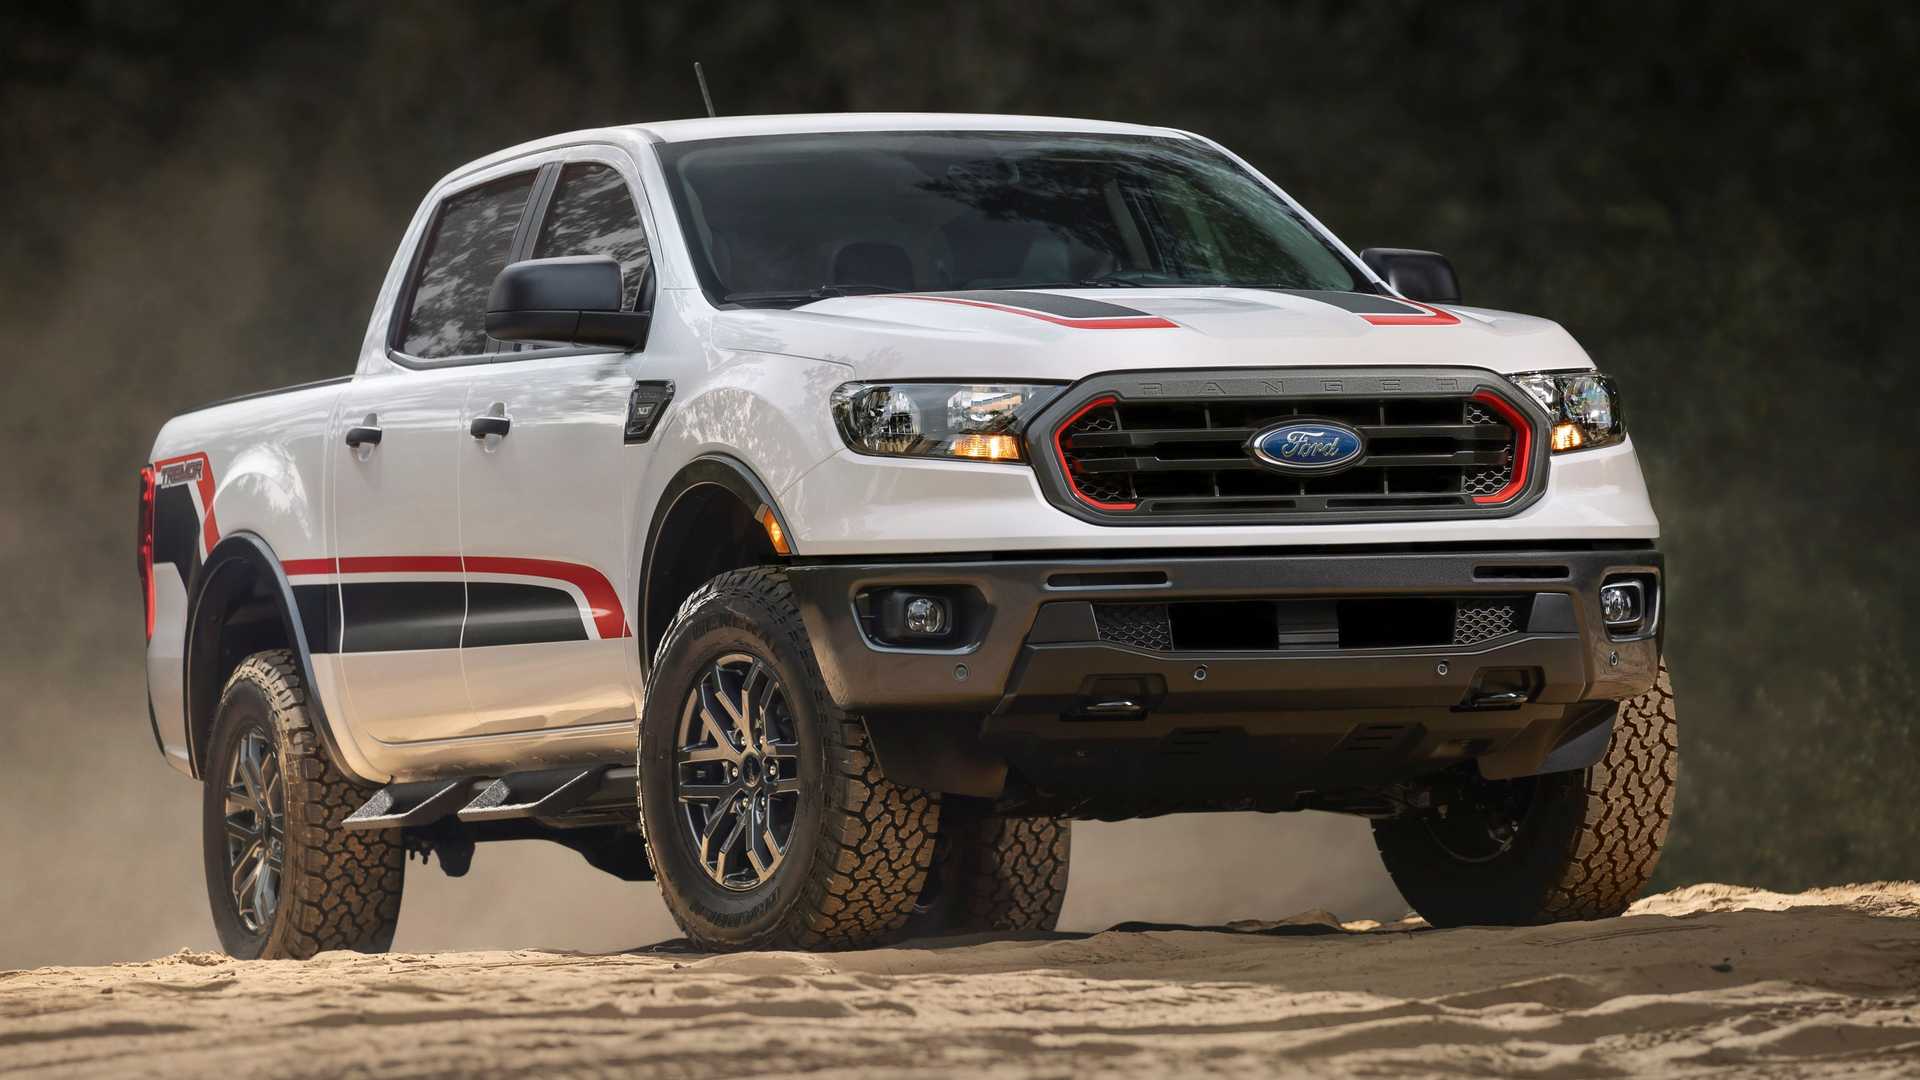 Ford Ranger Tremor Revealed With Serious Off Road Upgrades